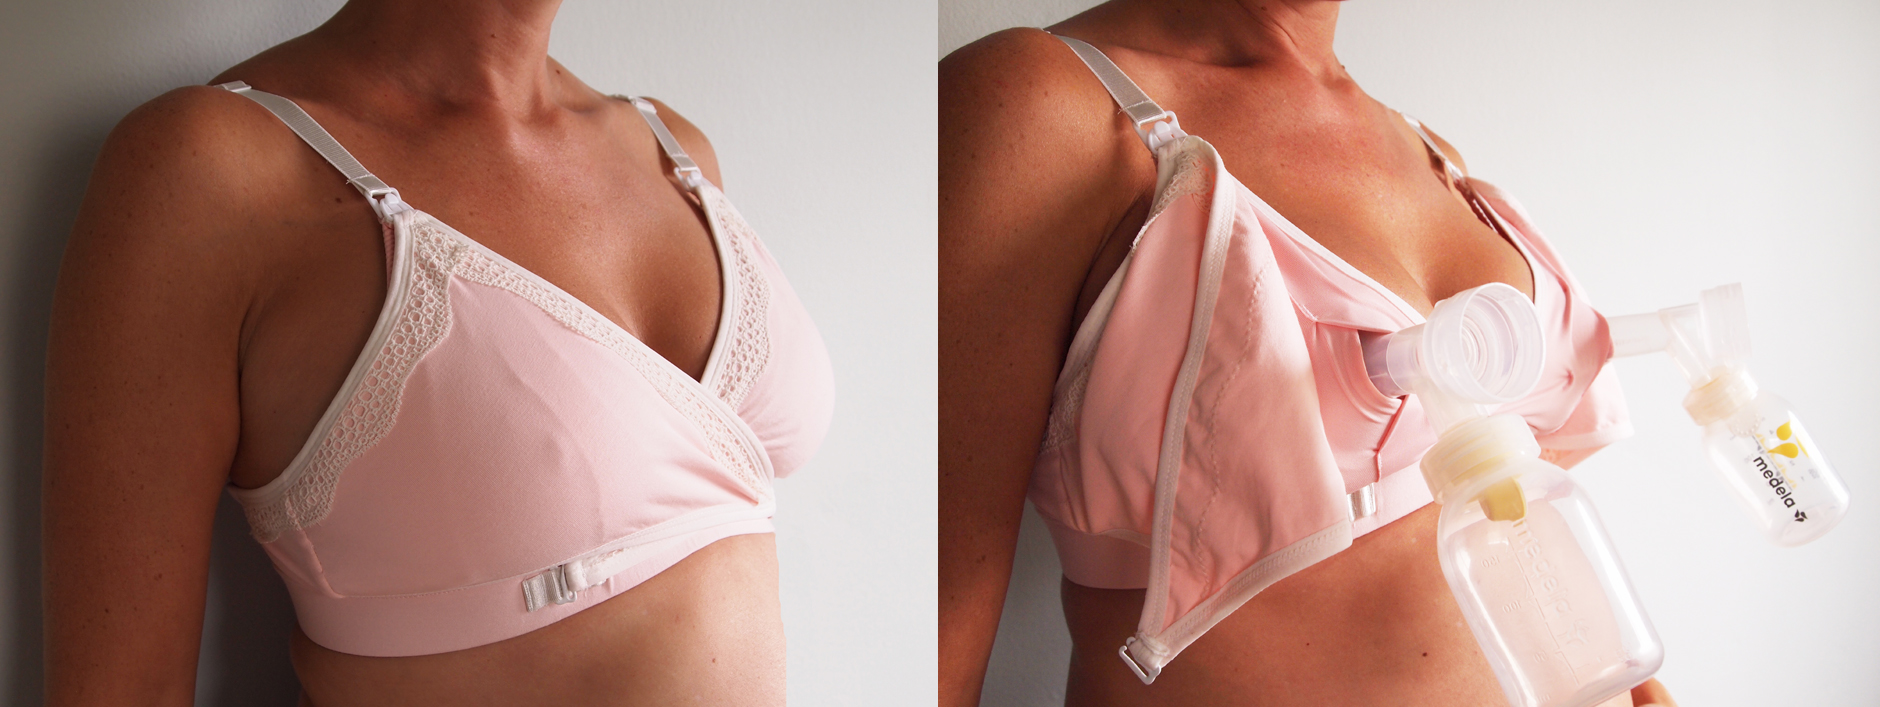 The Dairy Fairy Arden hands free pumping bra Giveaway at